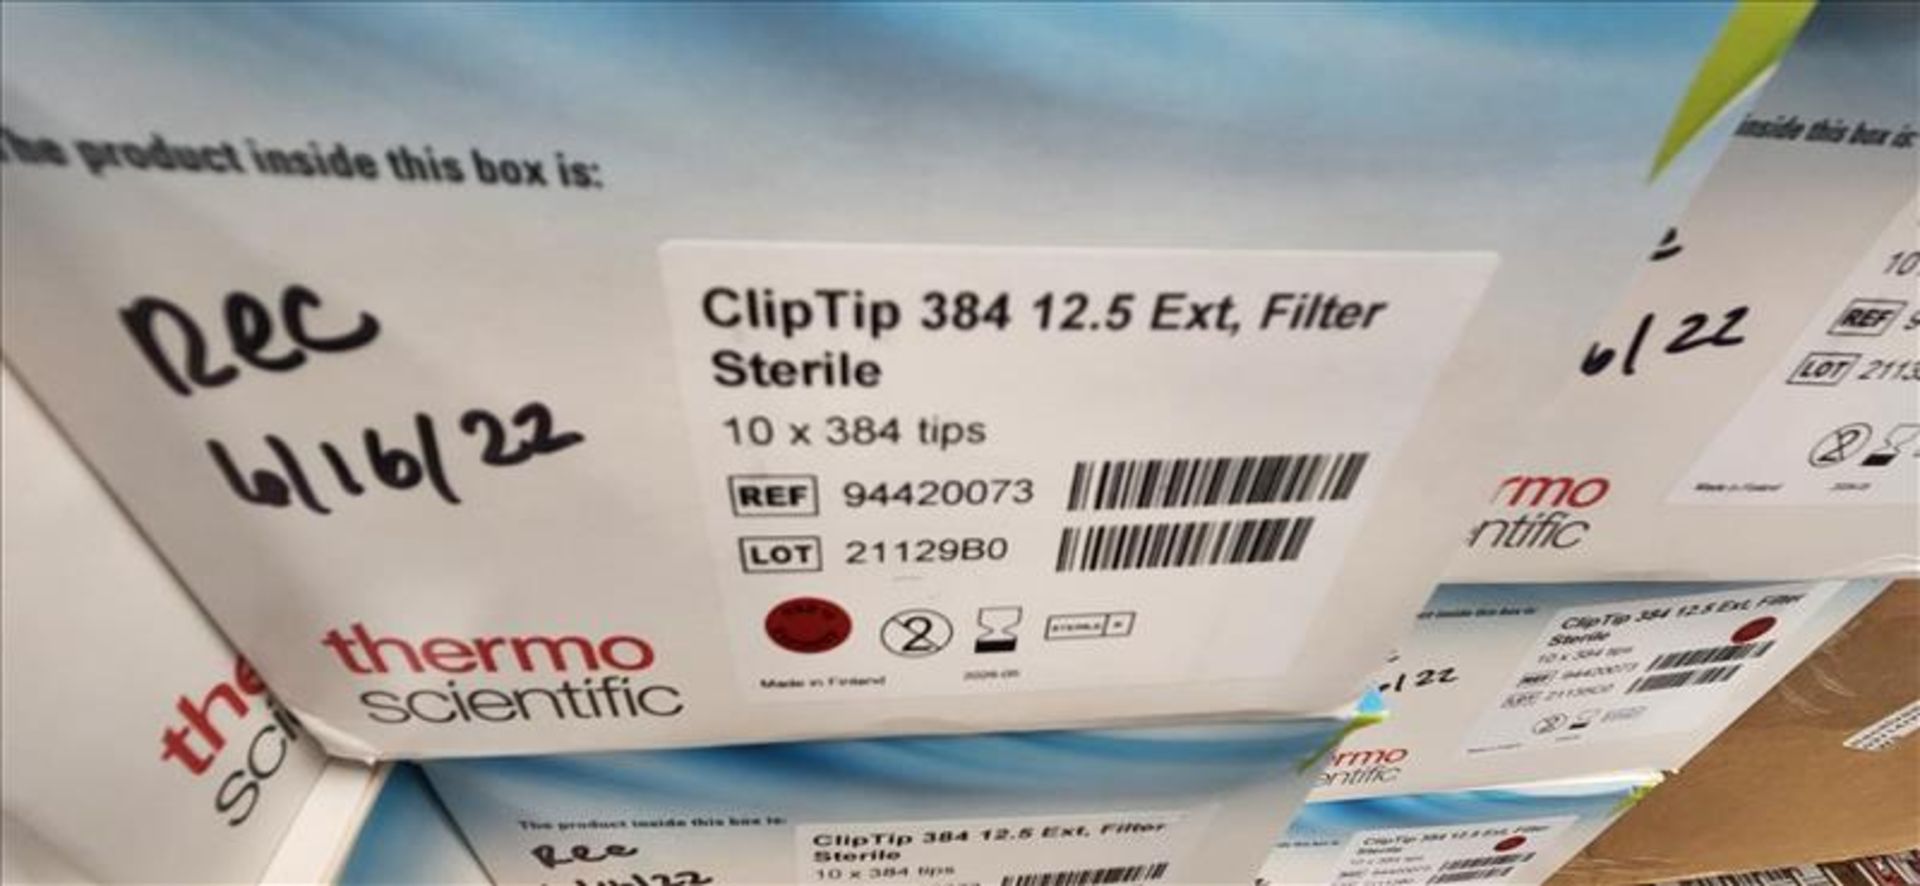 Lot of Thermo Scientific Sterile Filters, ClipTip 384 12.45 Ext - Image 2 of 2